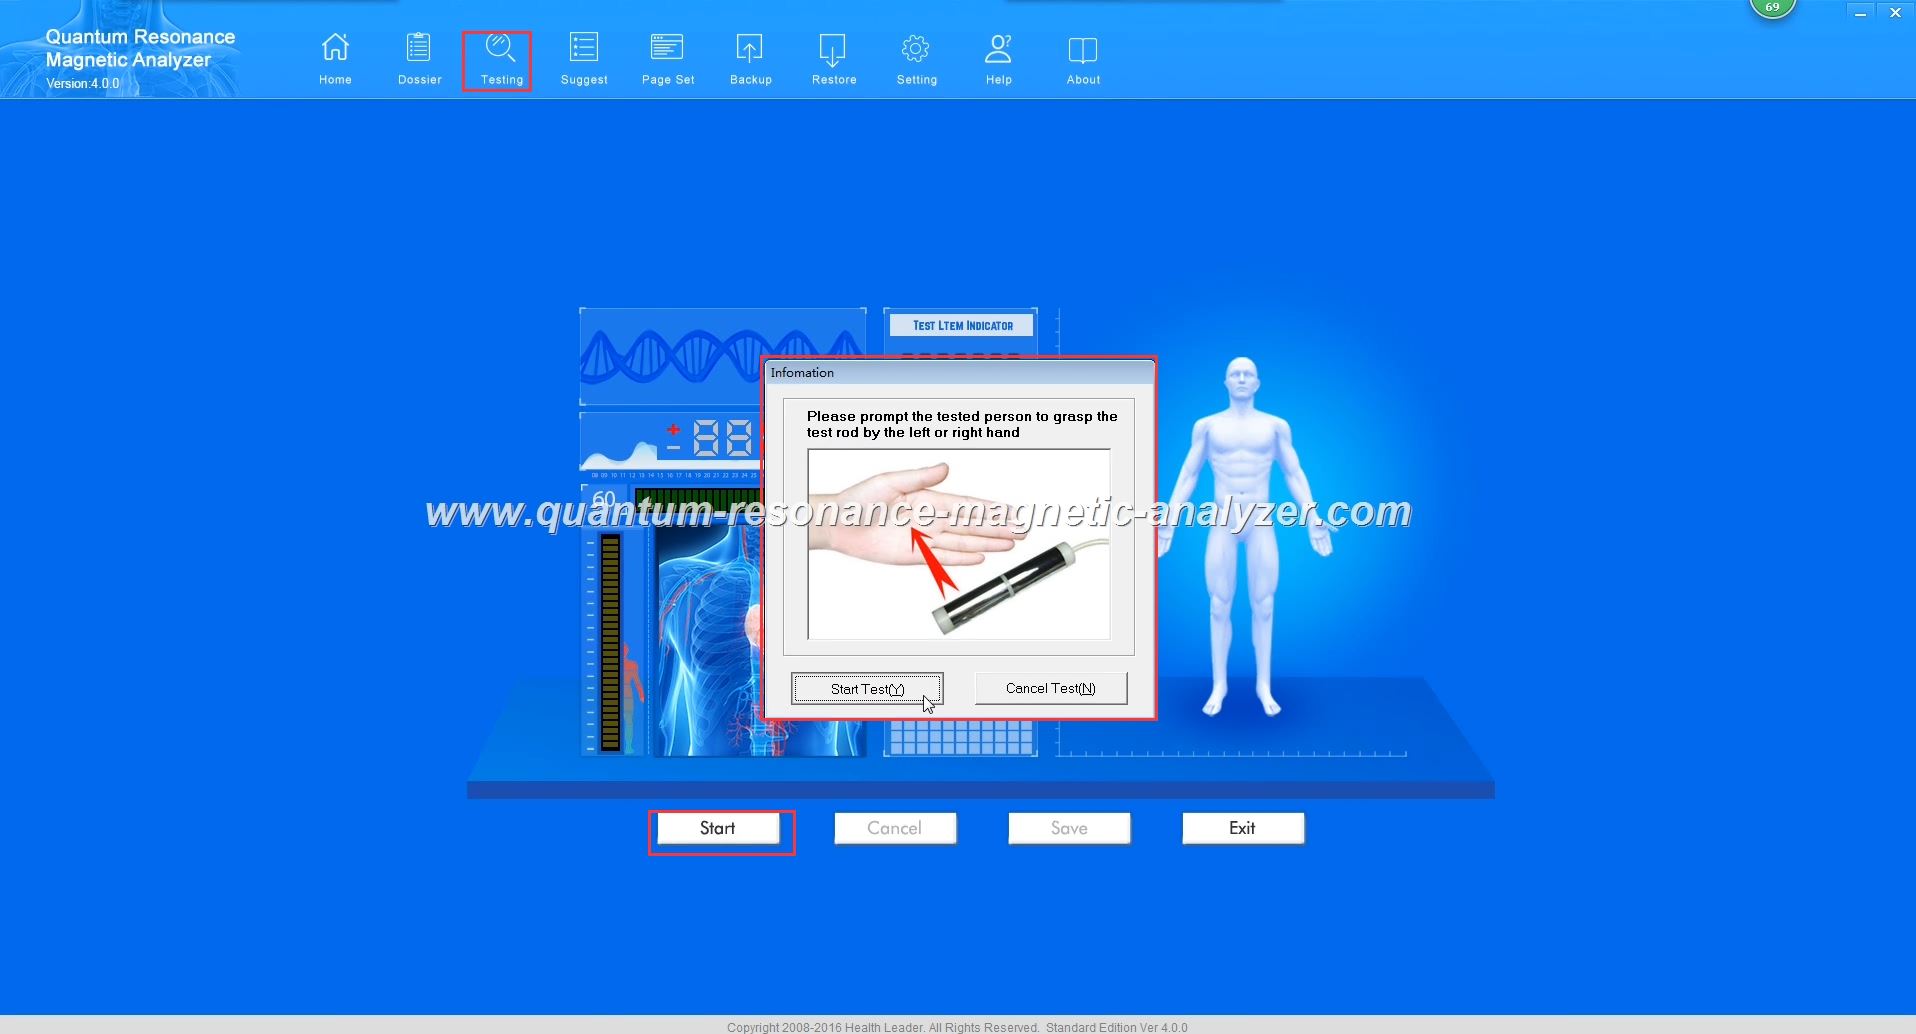 Download the English Quantum Resonance Magnetic Analyzer Software 3.1.0